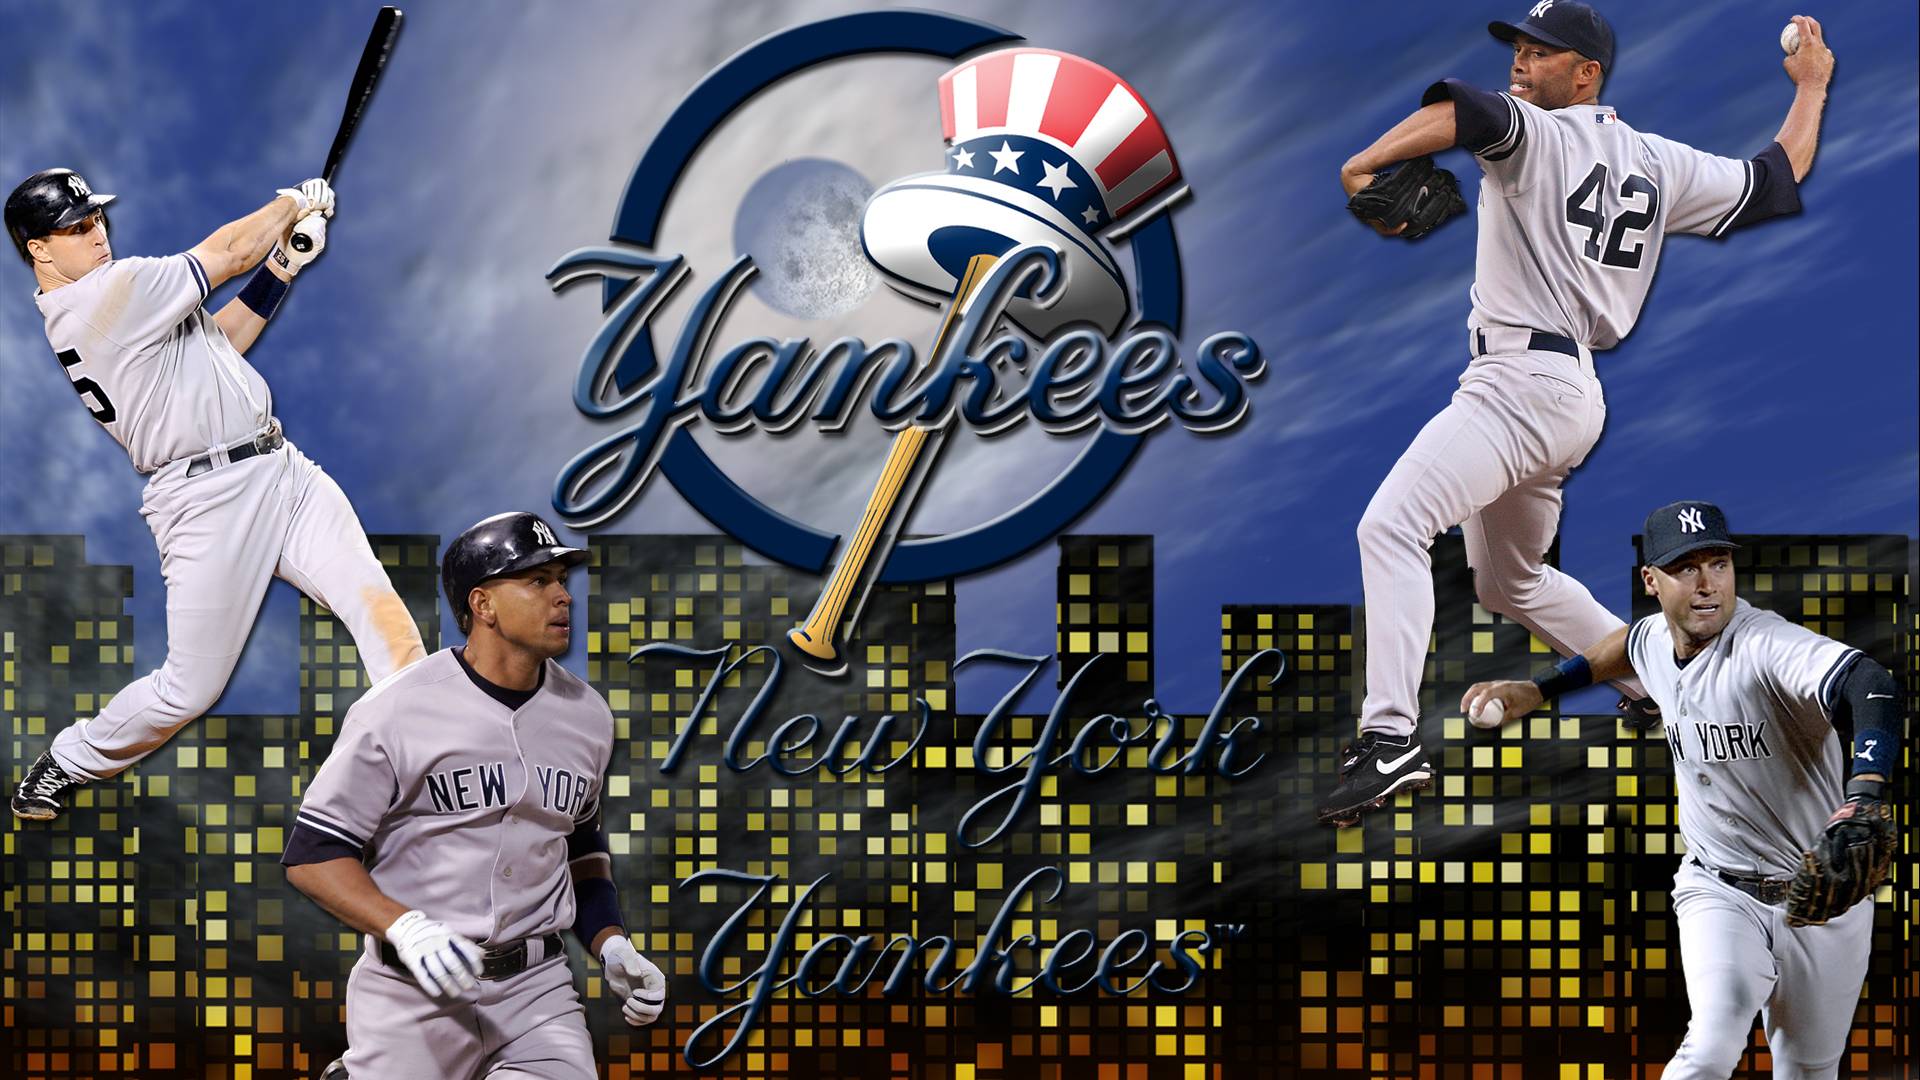 Out Our New York Yankees Wallpaper